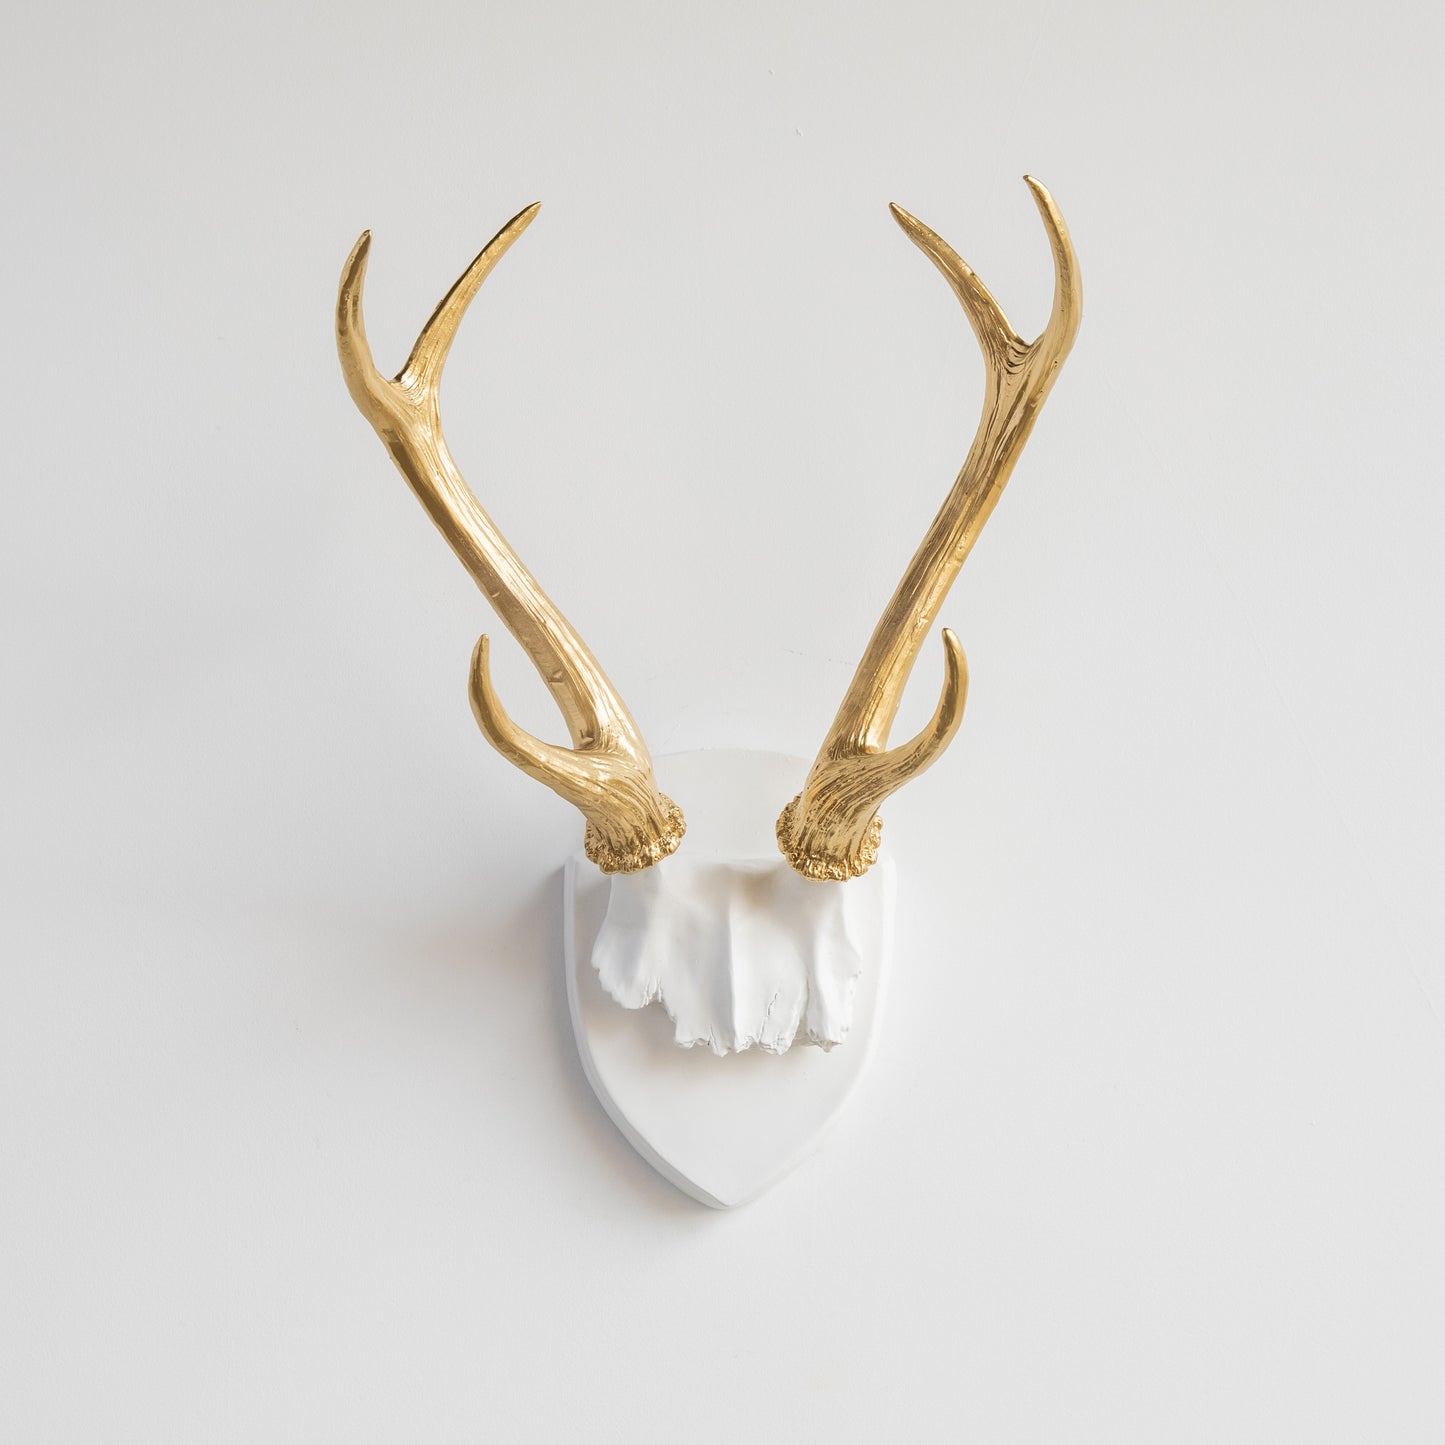 Faux Deer Antler Wall Trophy // White and Gold